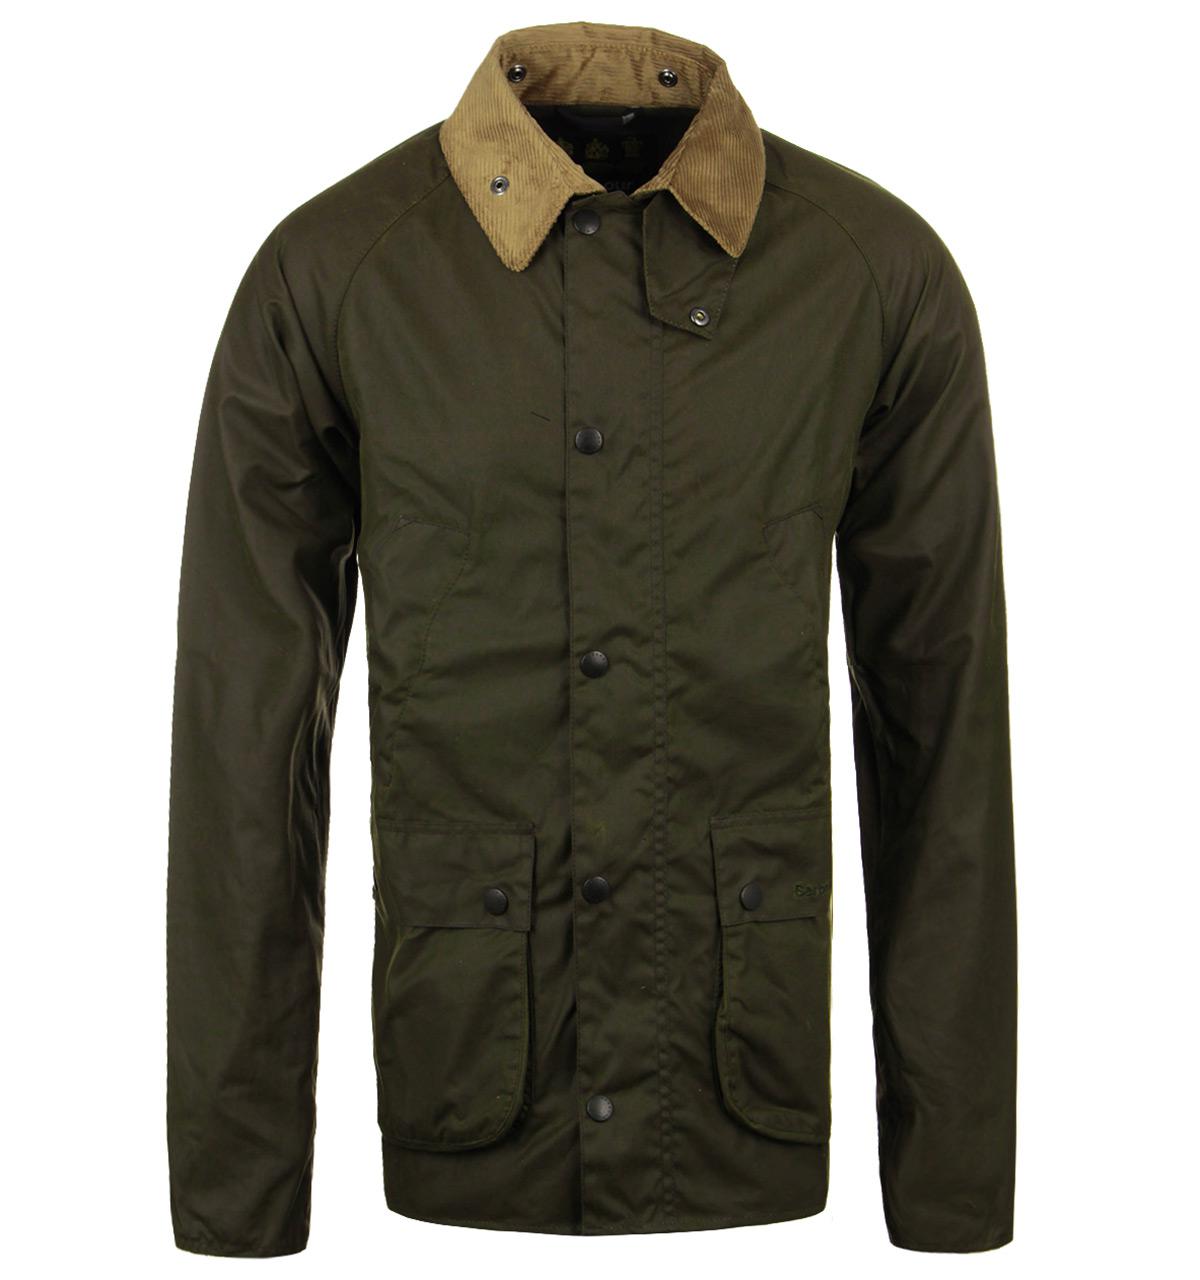 Lyst - Barbour Sl Bedale Olive Waxed Cotton Jacket in Green for Men